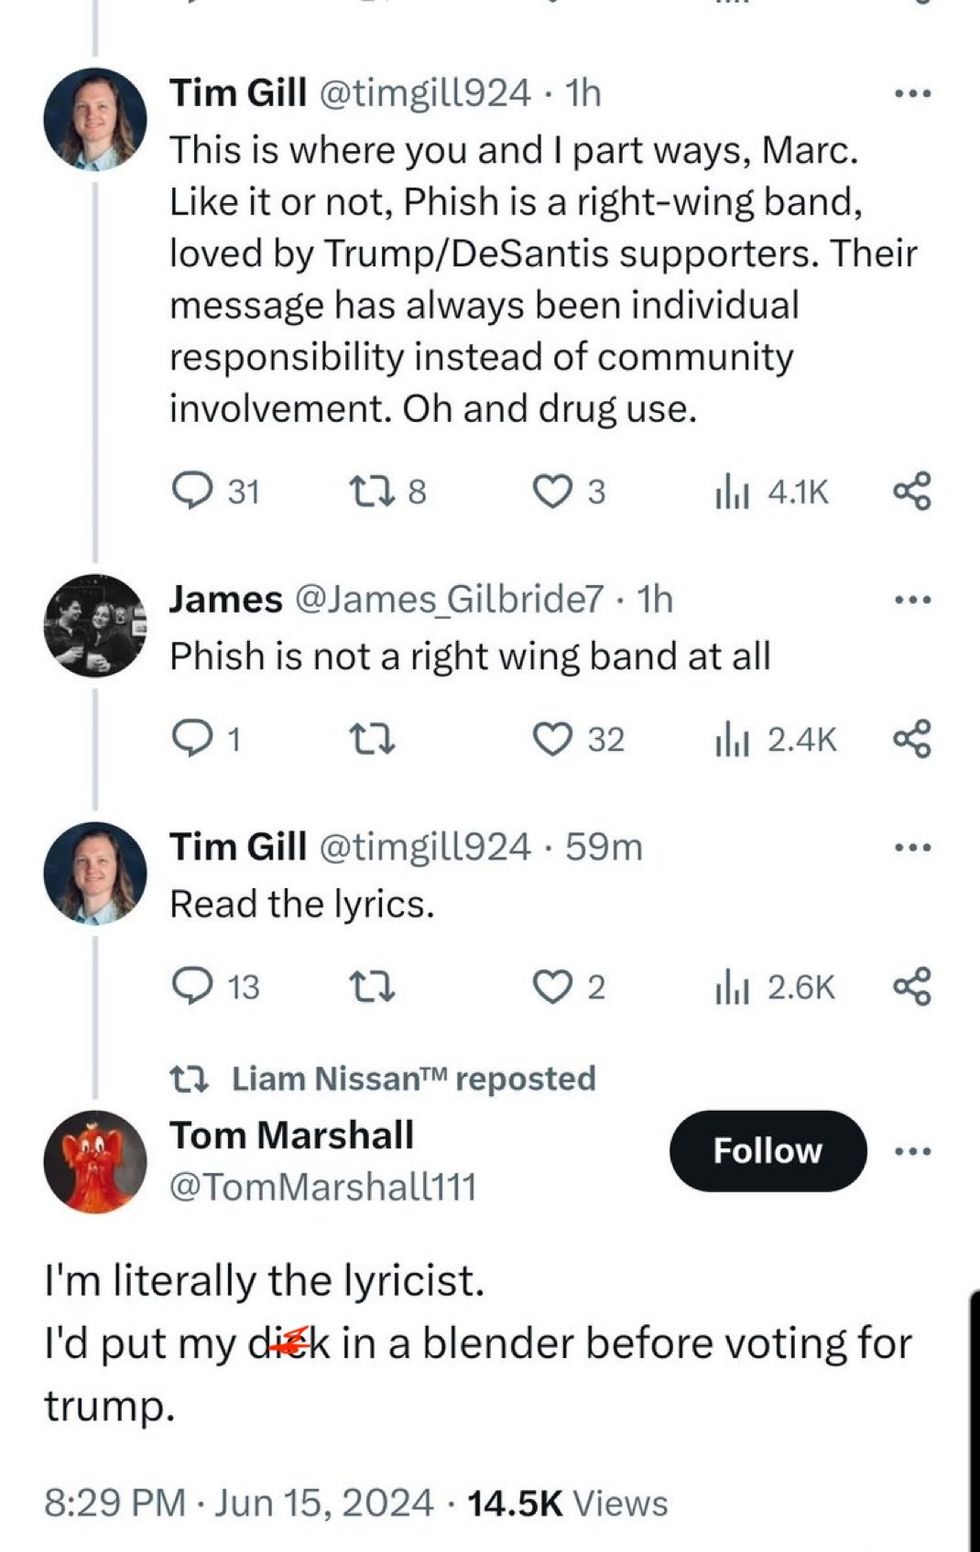 Screenshot of exchange between Tim Gill, another X poster, and Tom Marshall of Phish